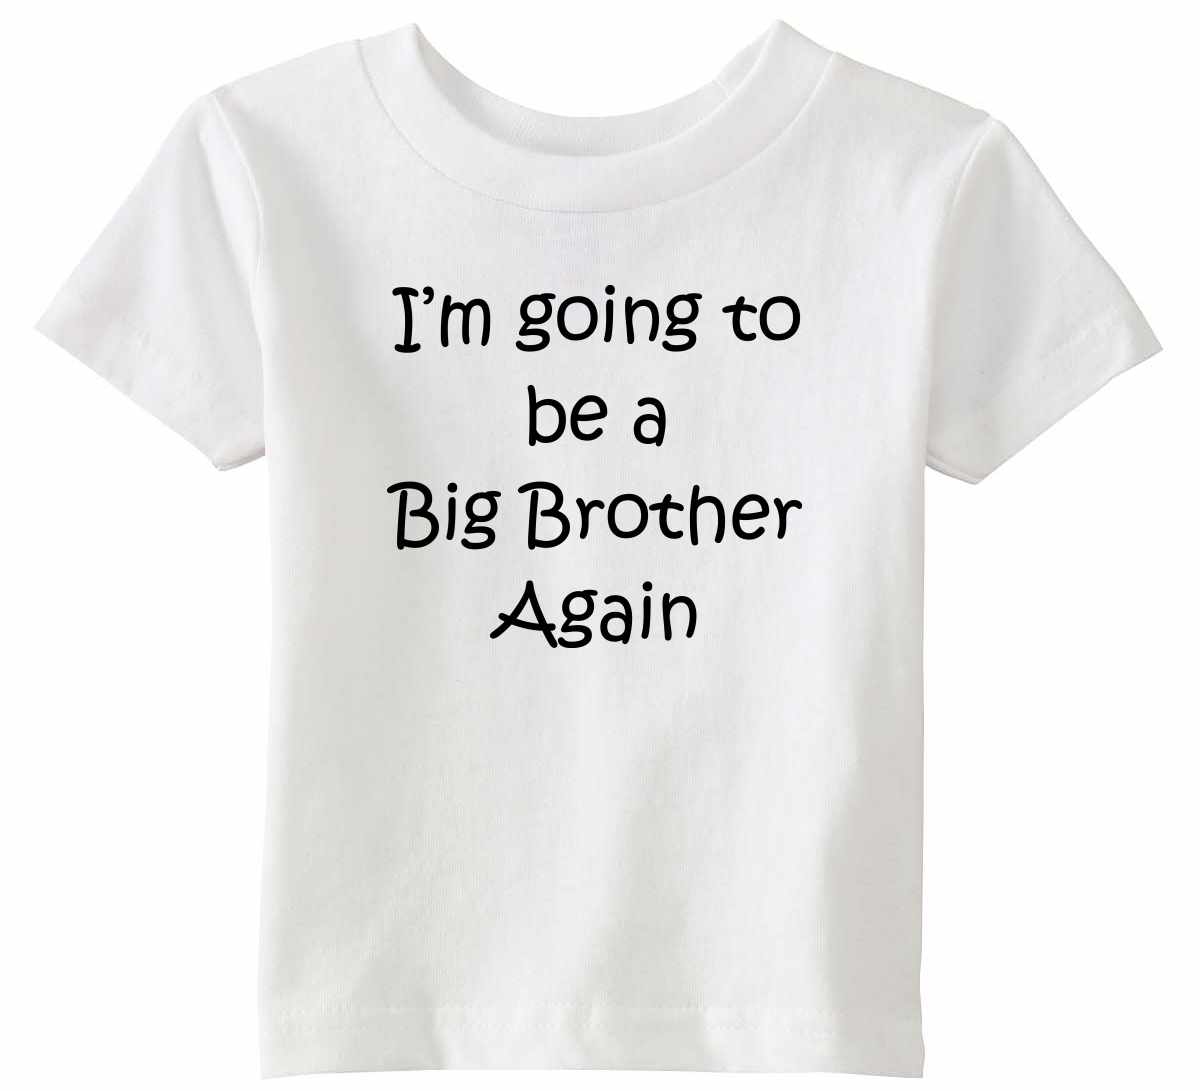 I'm Going to be a Big Brother Again Infant/Toddler  (#813-7)